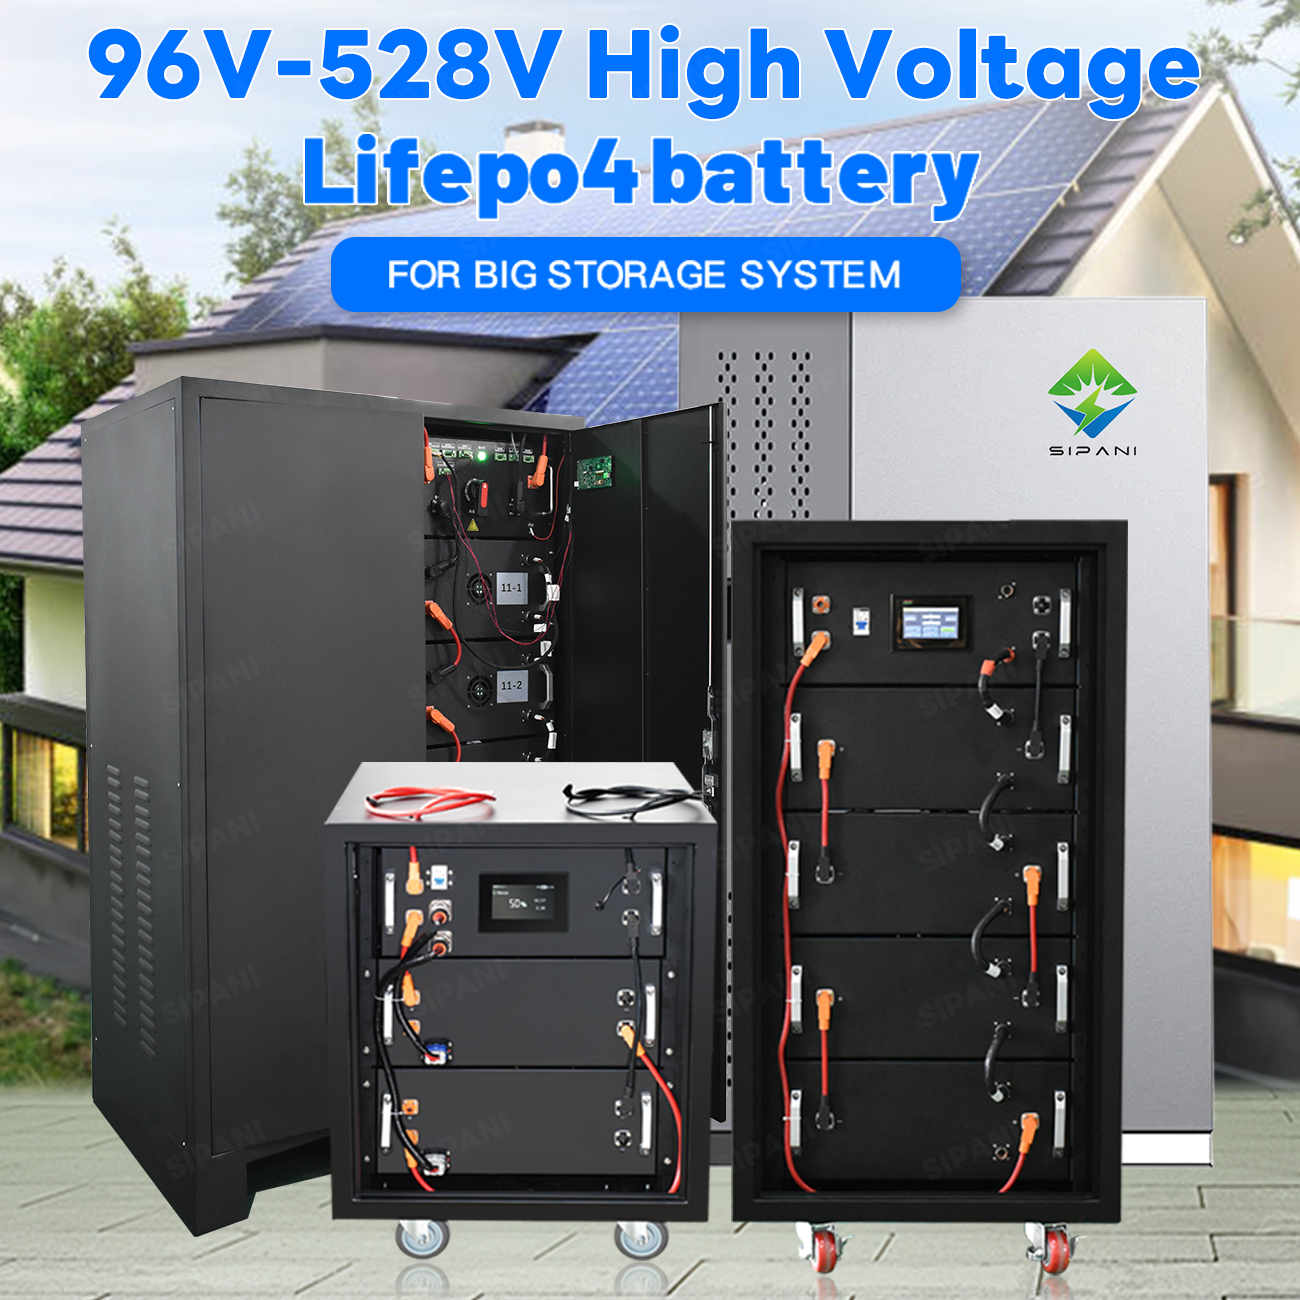 50kWh 100kWh 150kWh 200kWh Battery Storage System 528V HV ESS Rack Mount High Voltage Ups Lifepo4 Battery Pack Solar 105kwh Compatible with Deye Inverter